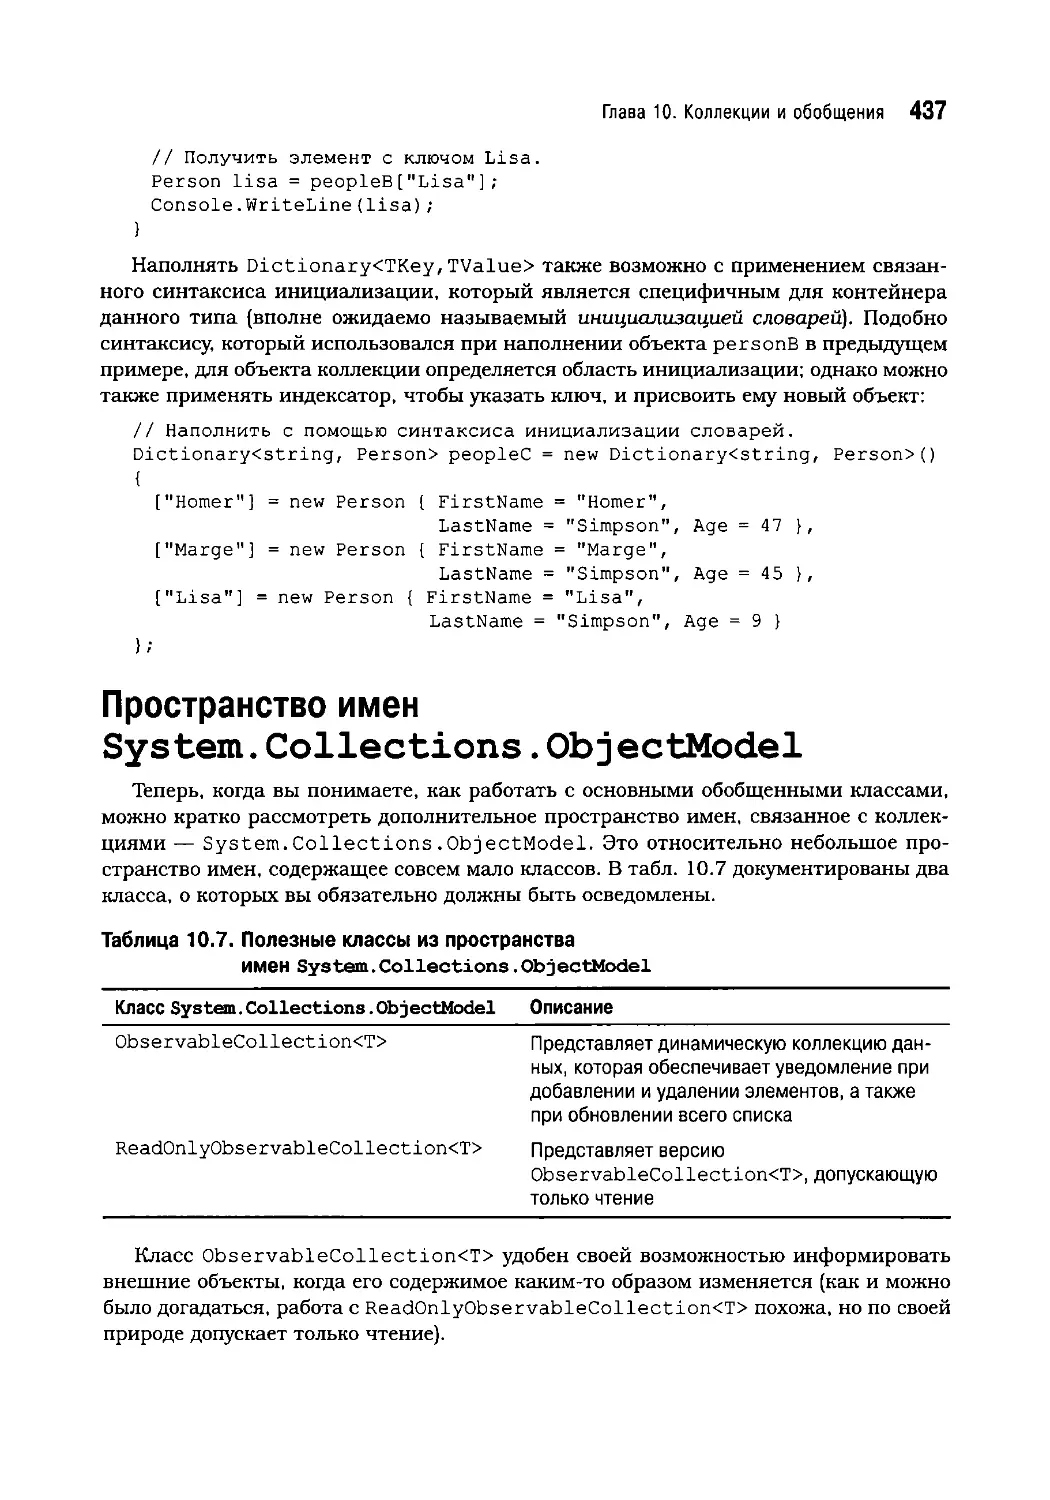 Пространство имен System.Collections.ObjectModel